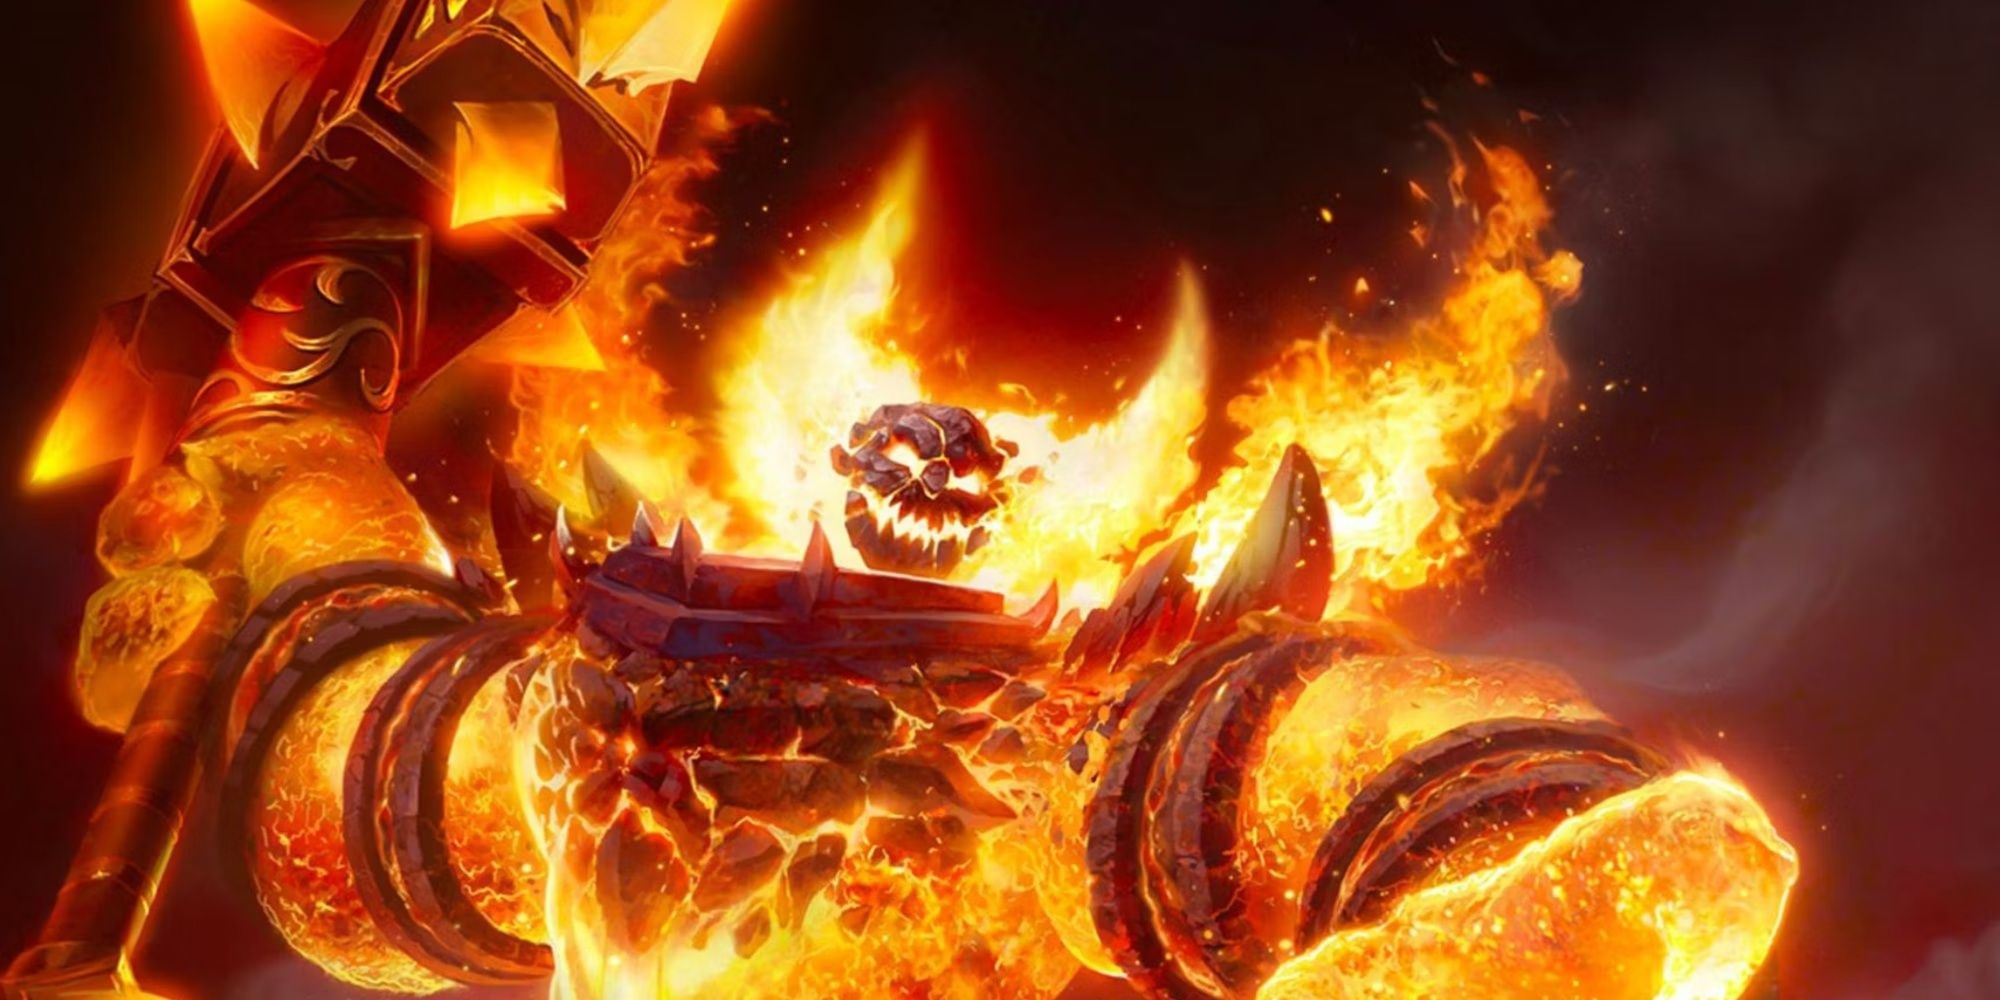 Ragnaros, the boss of the Molten Core raid, a character from World of Warcraft Classic